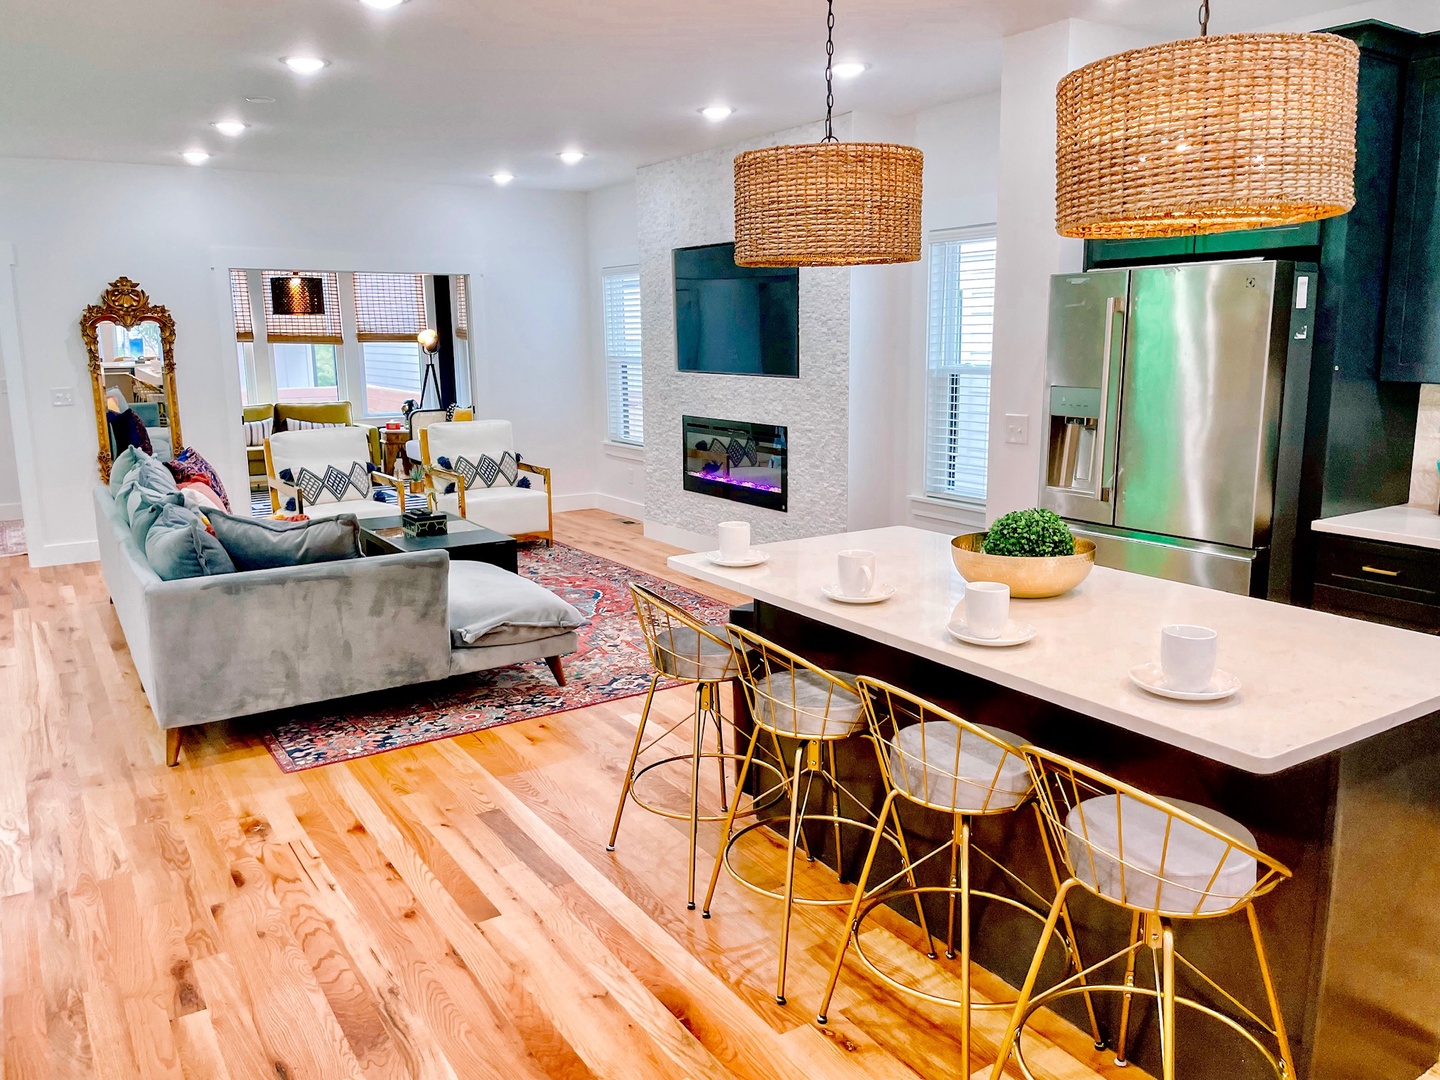 This gorgeous, chic kitchen is well-equipped for your visit to Nashville